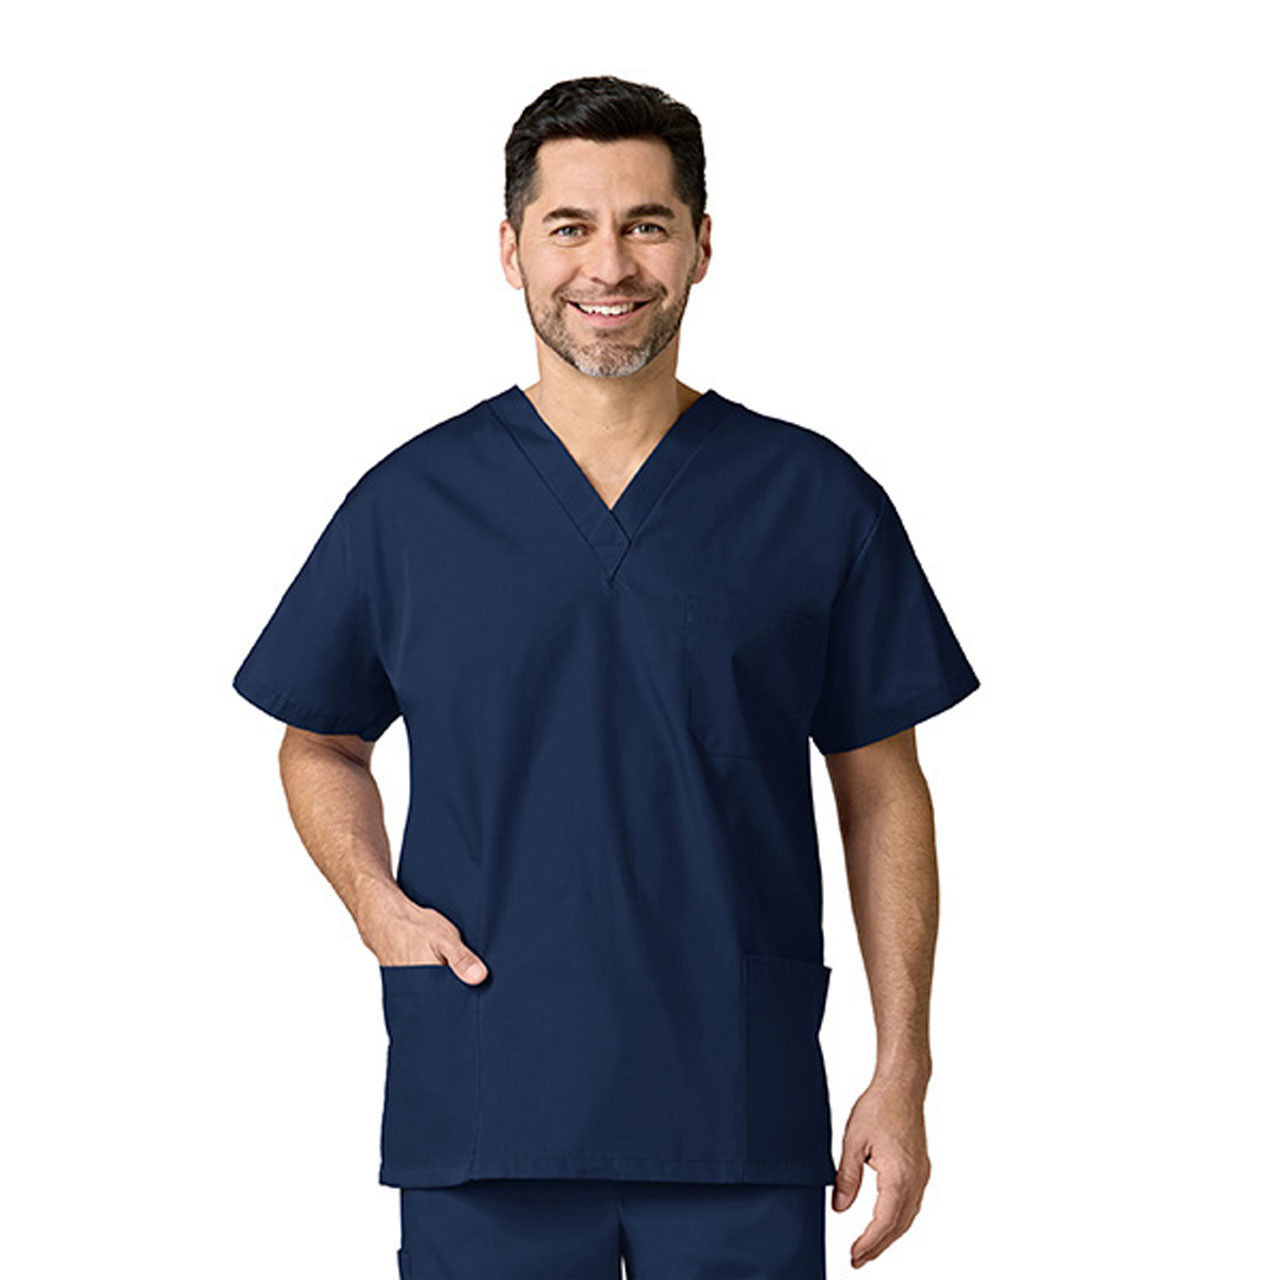 Where are the pockets located on the Navy Blue Scrub Top?